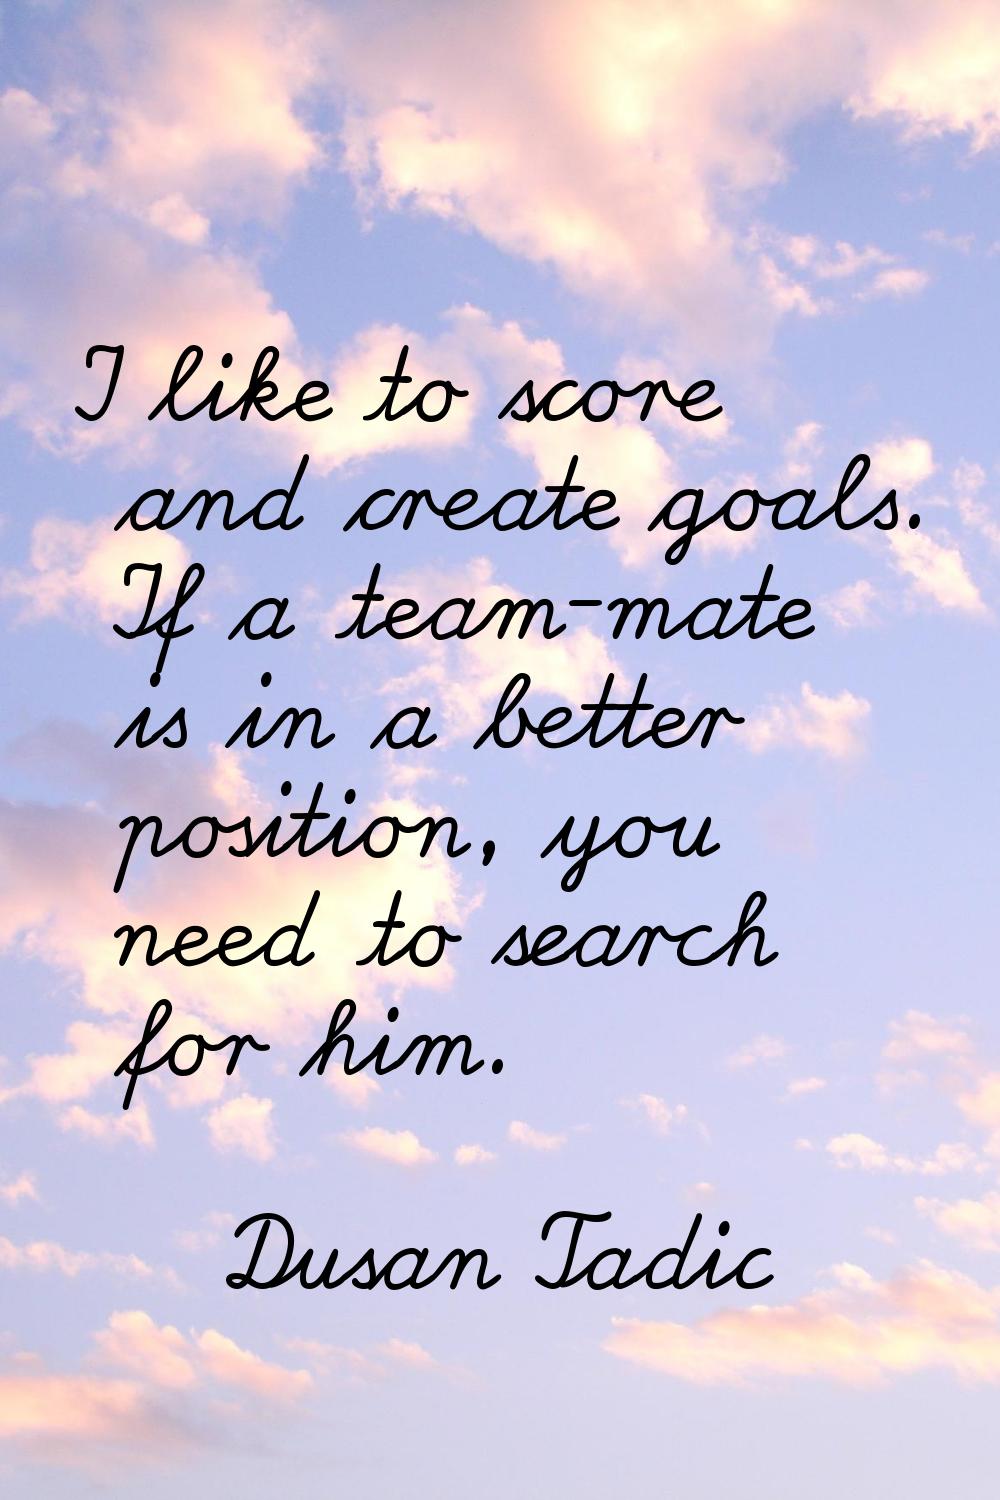 I like to score and create goals. If a team-mate is in a better position, you need to search for hi